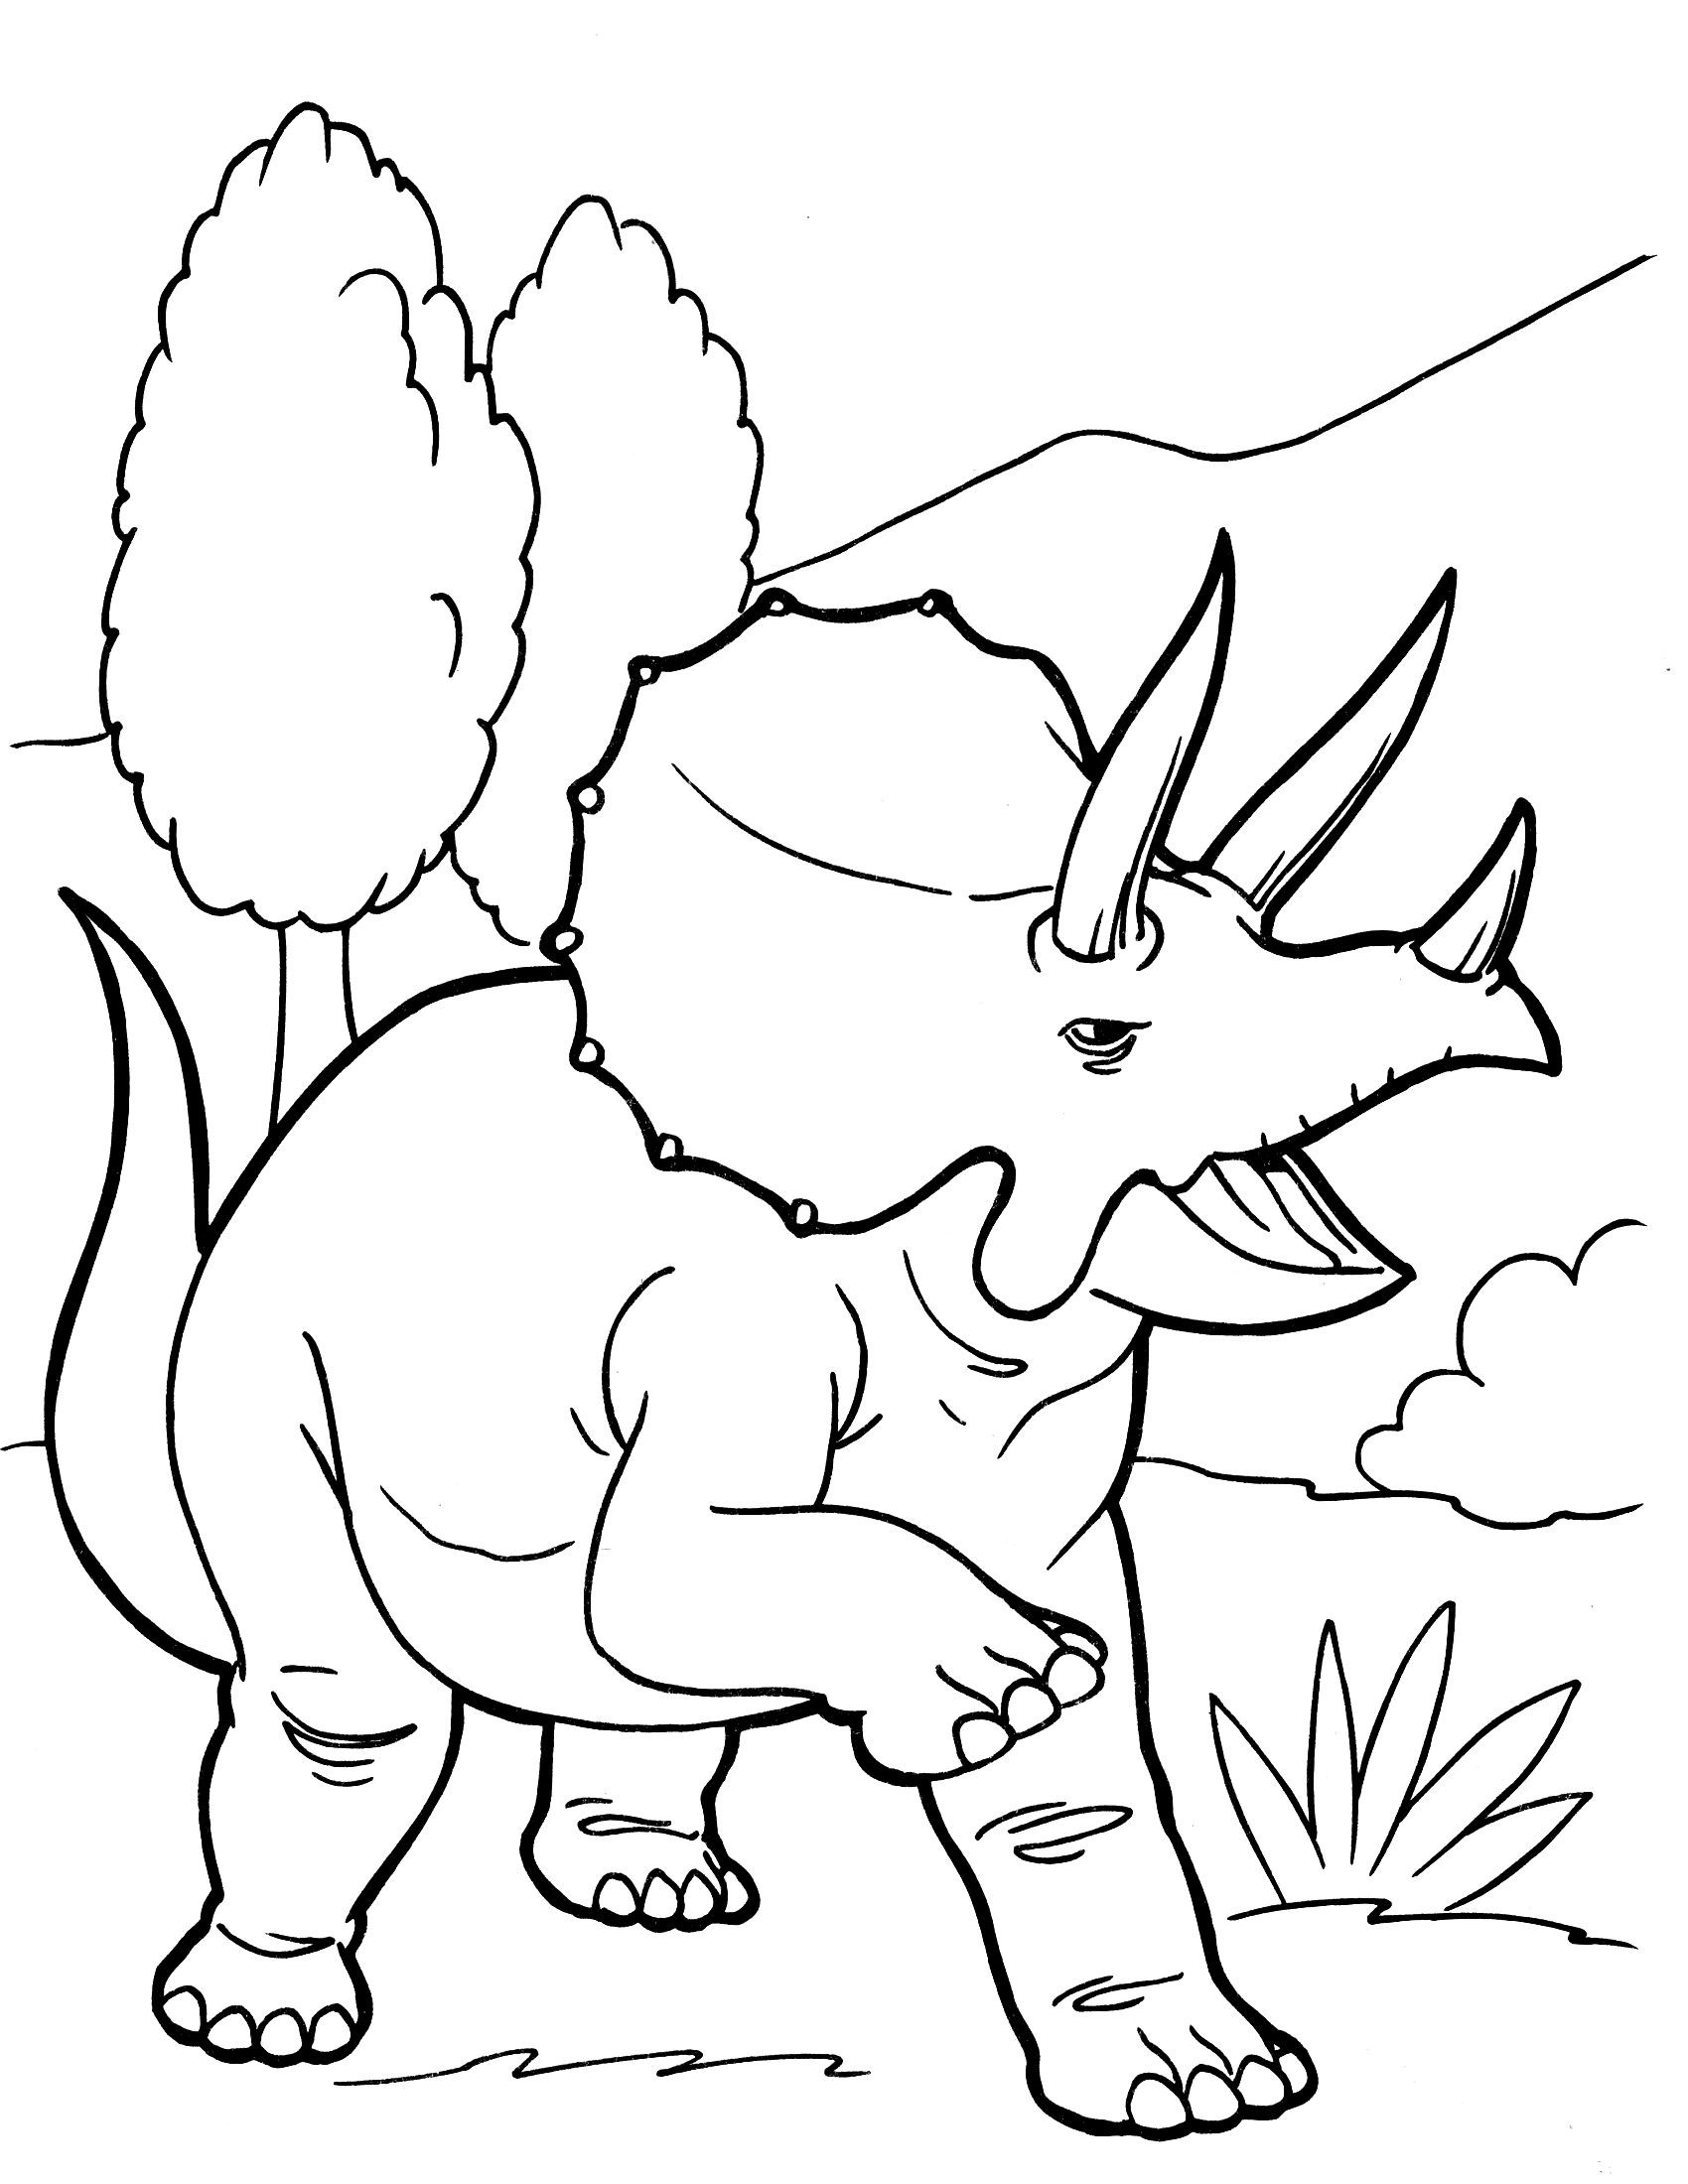 Coloring Pages For Kids Dinosaurs
 dinosaur paintings for kids